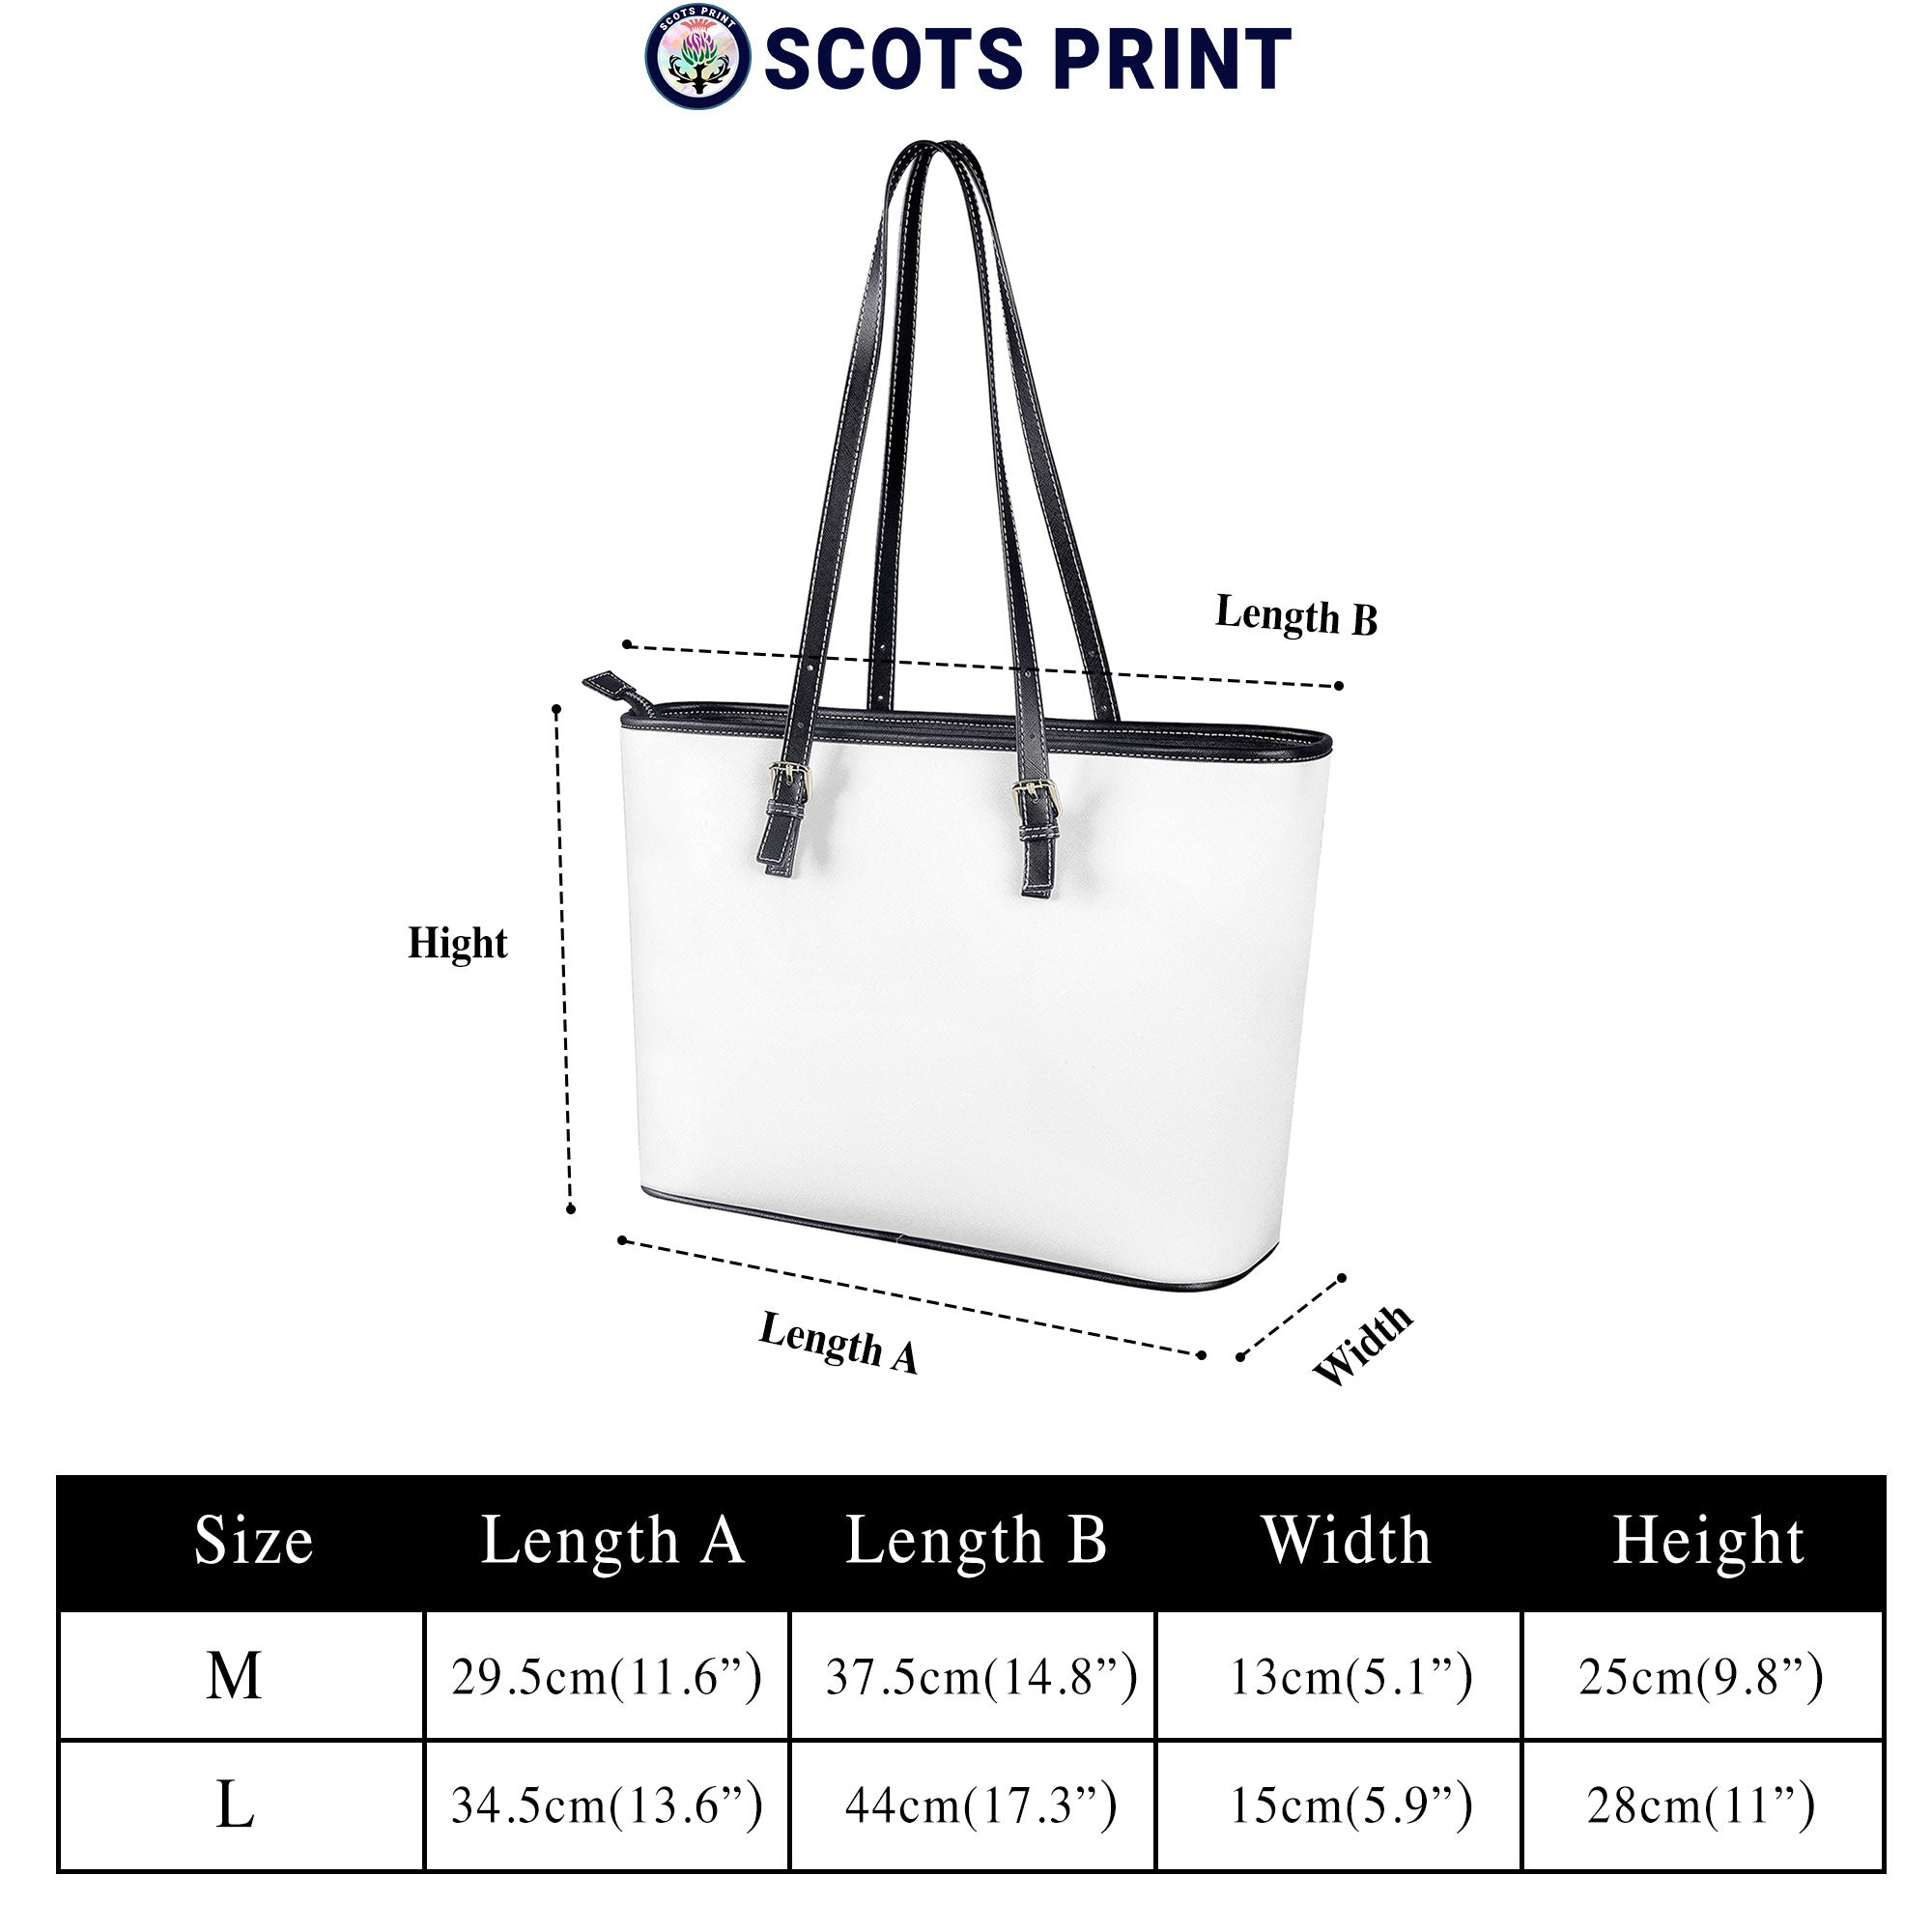 Shaw (of Sauchie) Ancient Tartan Crest Leather Tote Bag